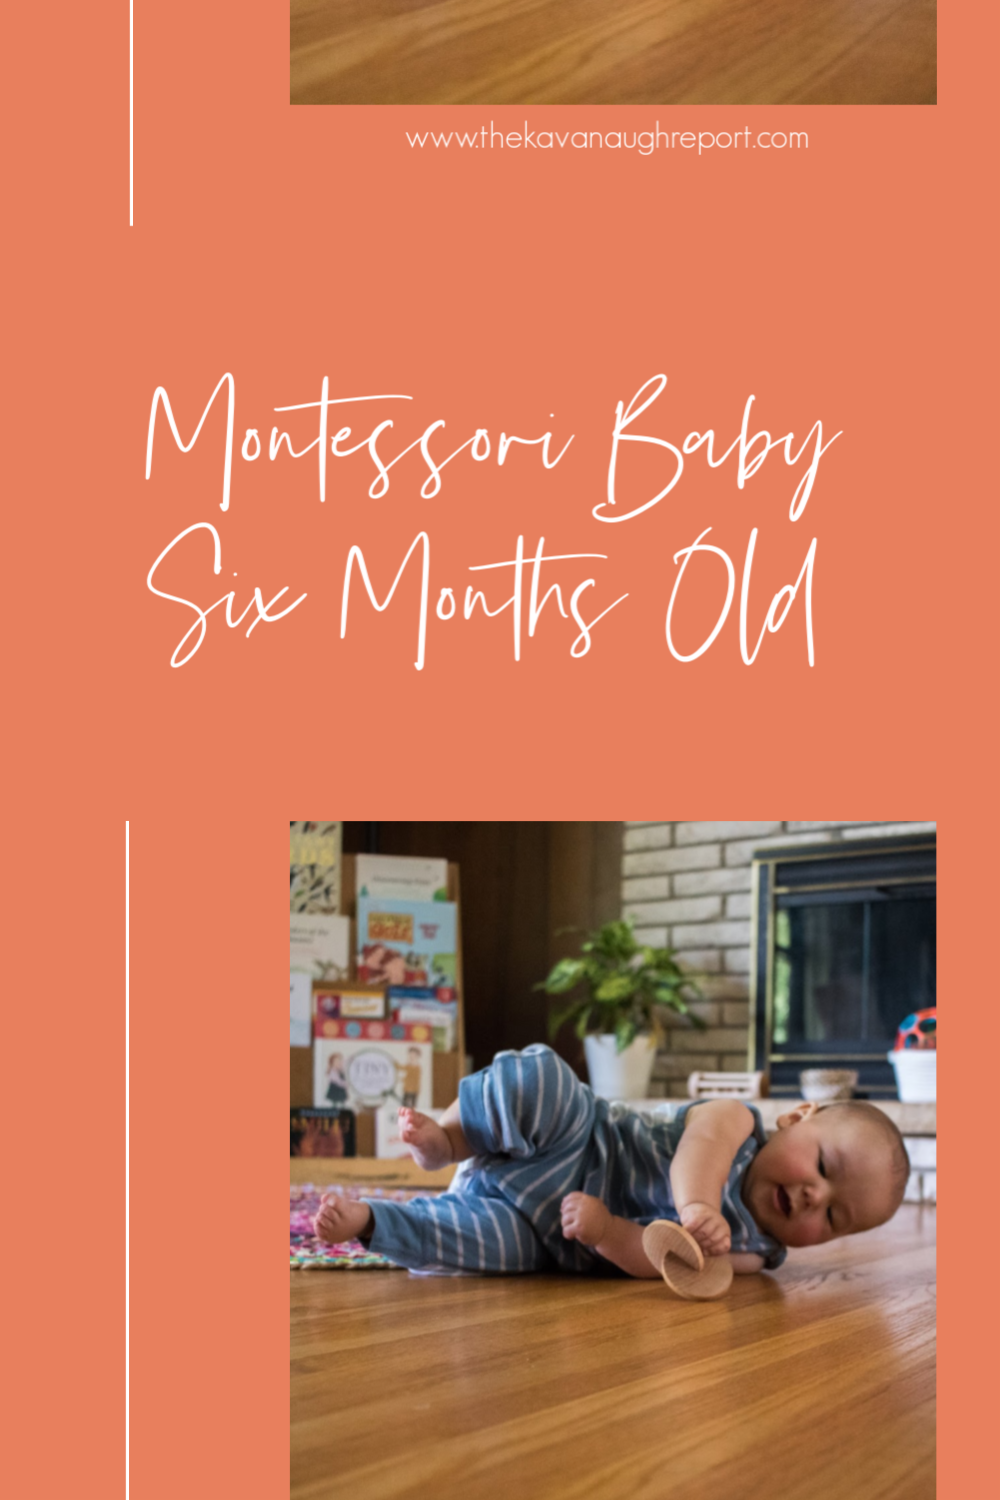 Using the Montessori method with your 6-month-old - articles and tips for using Montessori with your baby